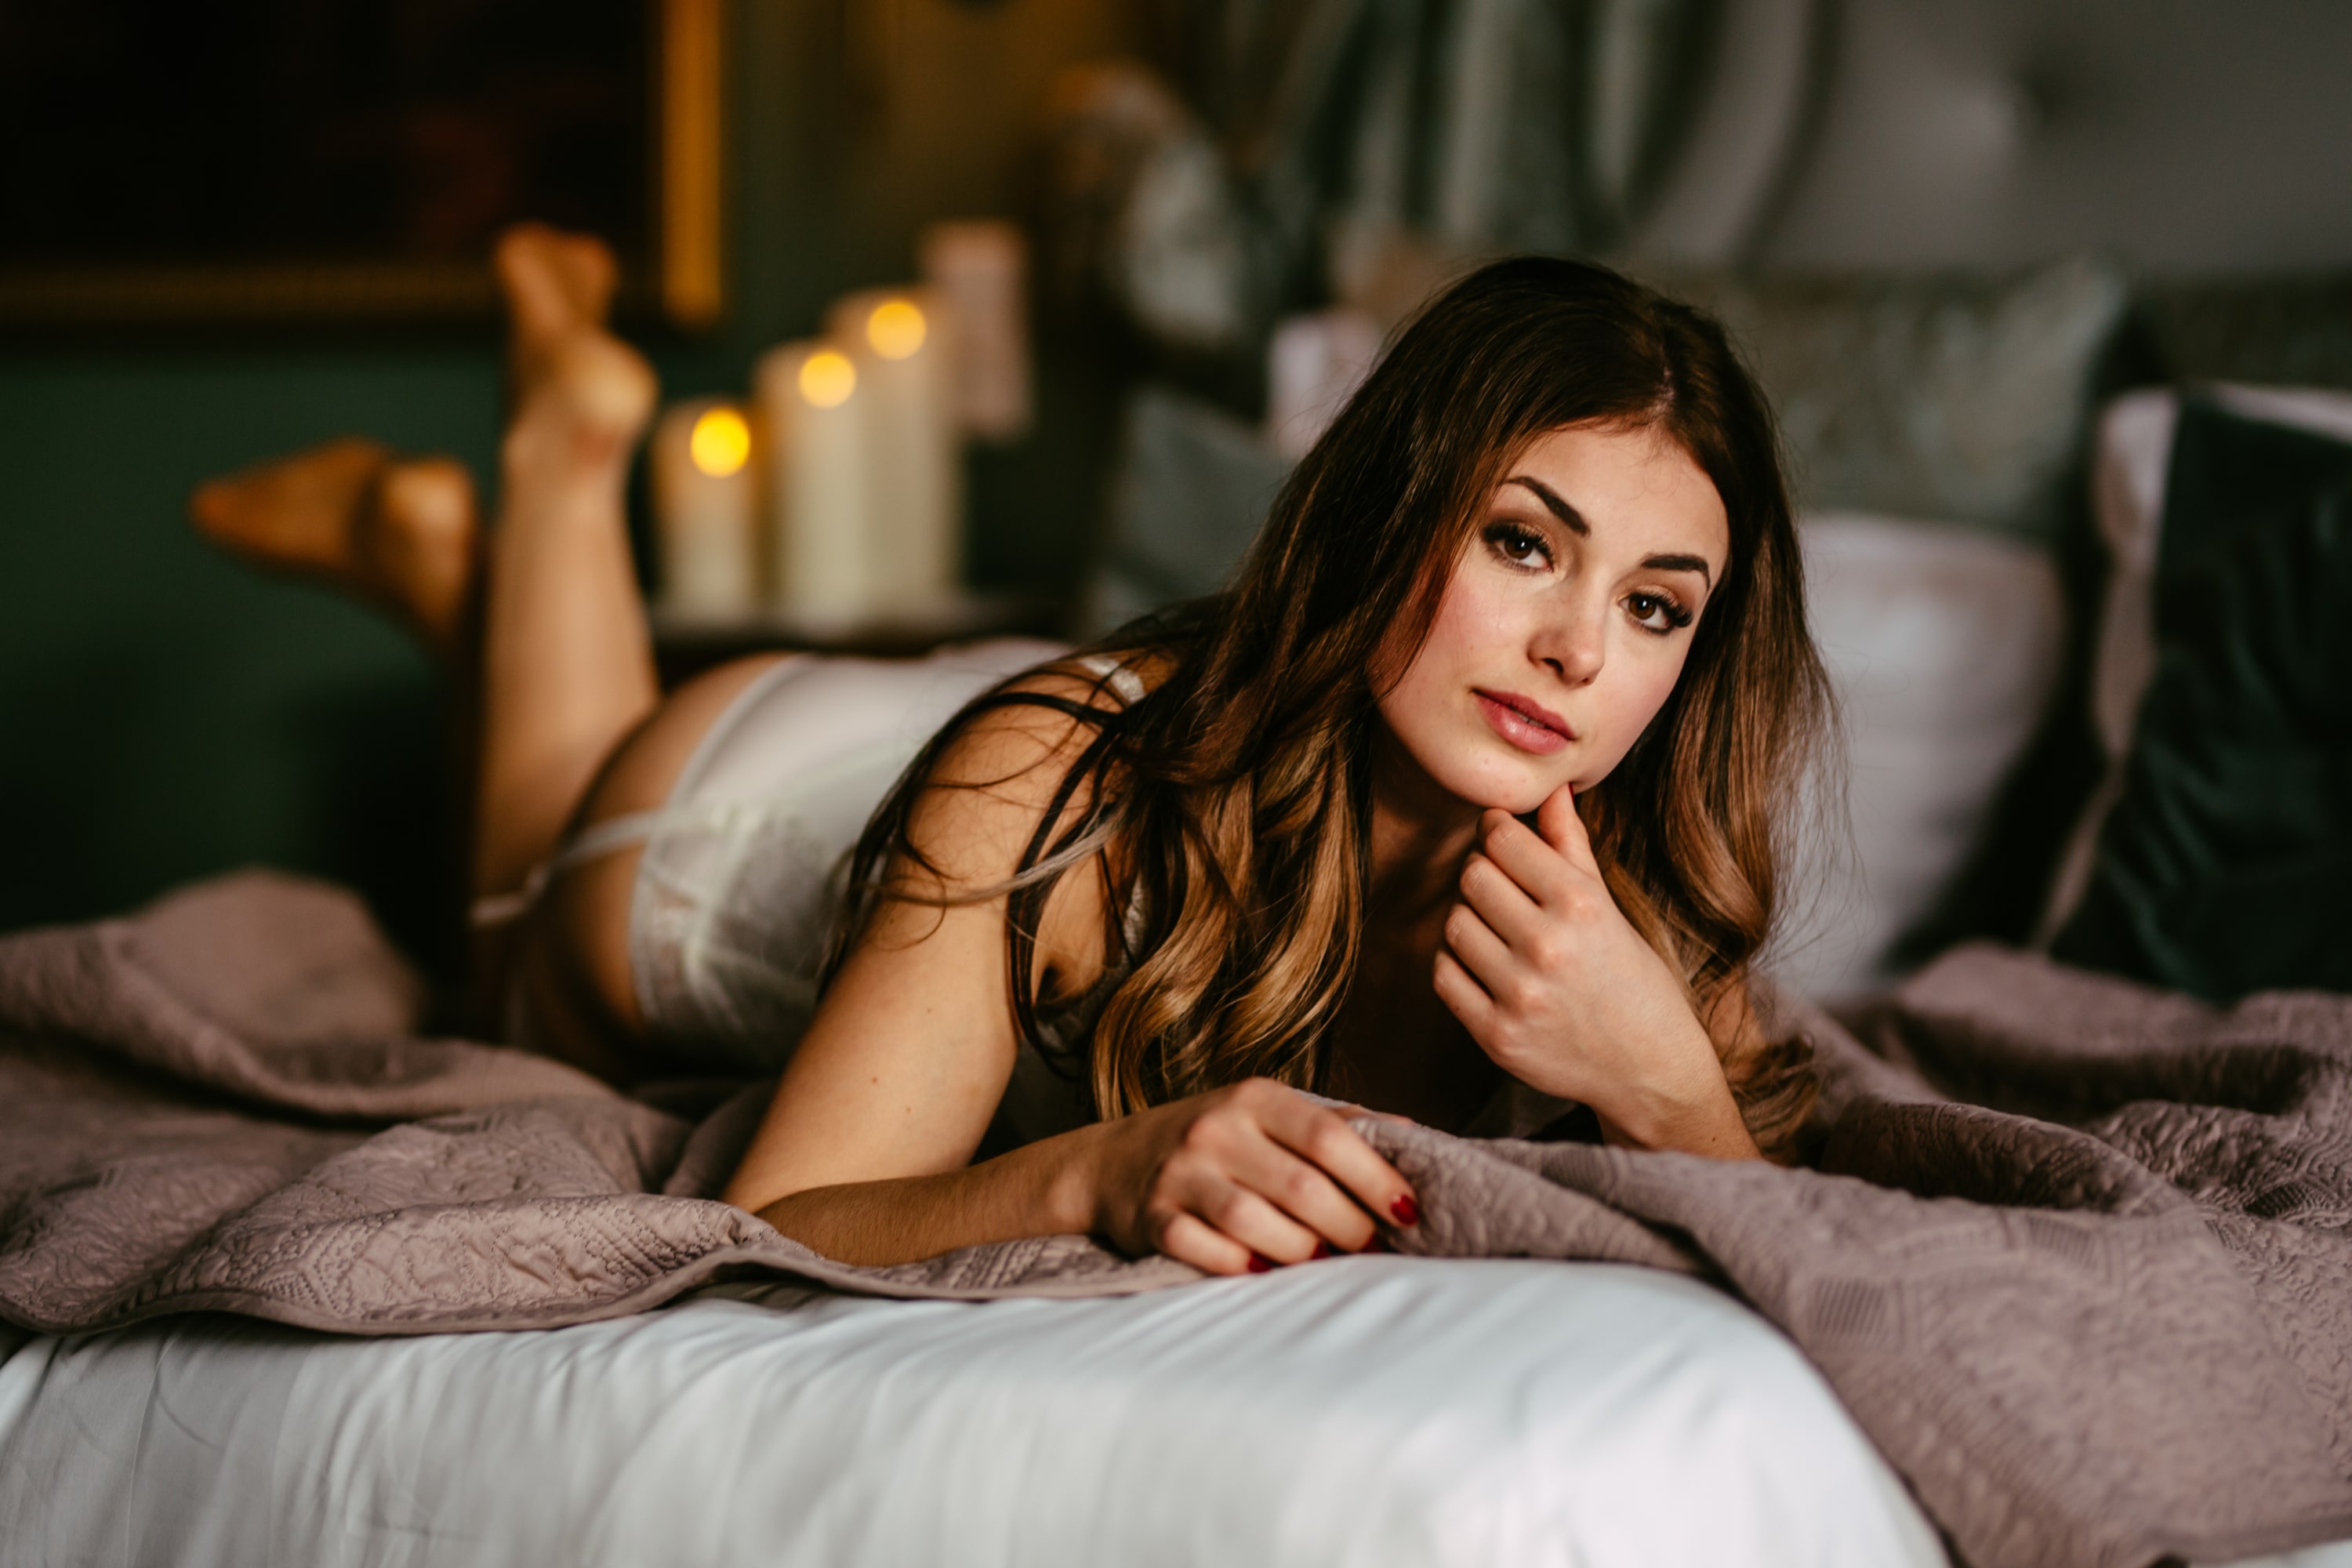 A beautiful woman lying on a bed with candles.